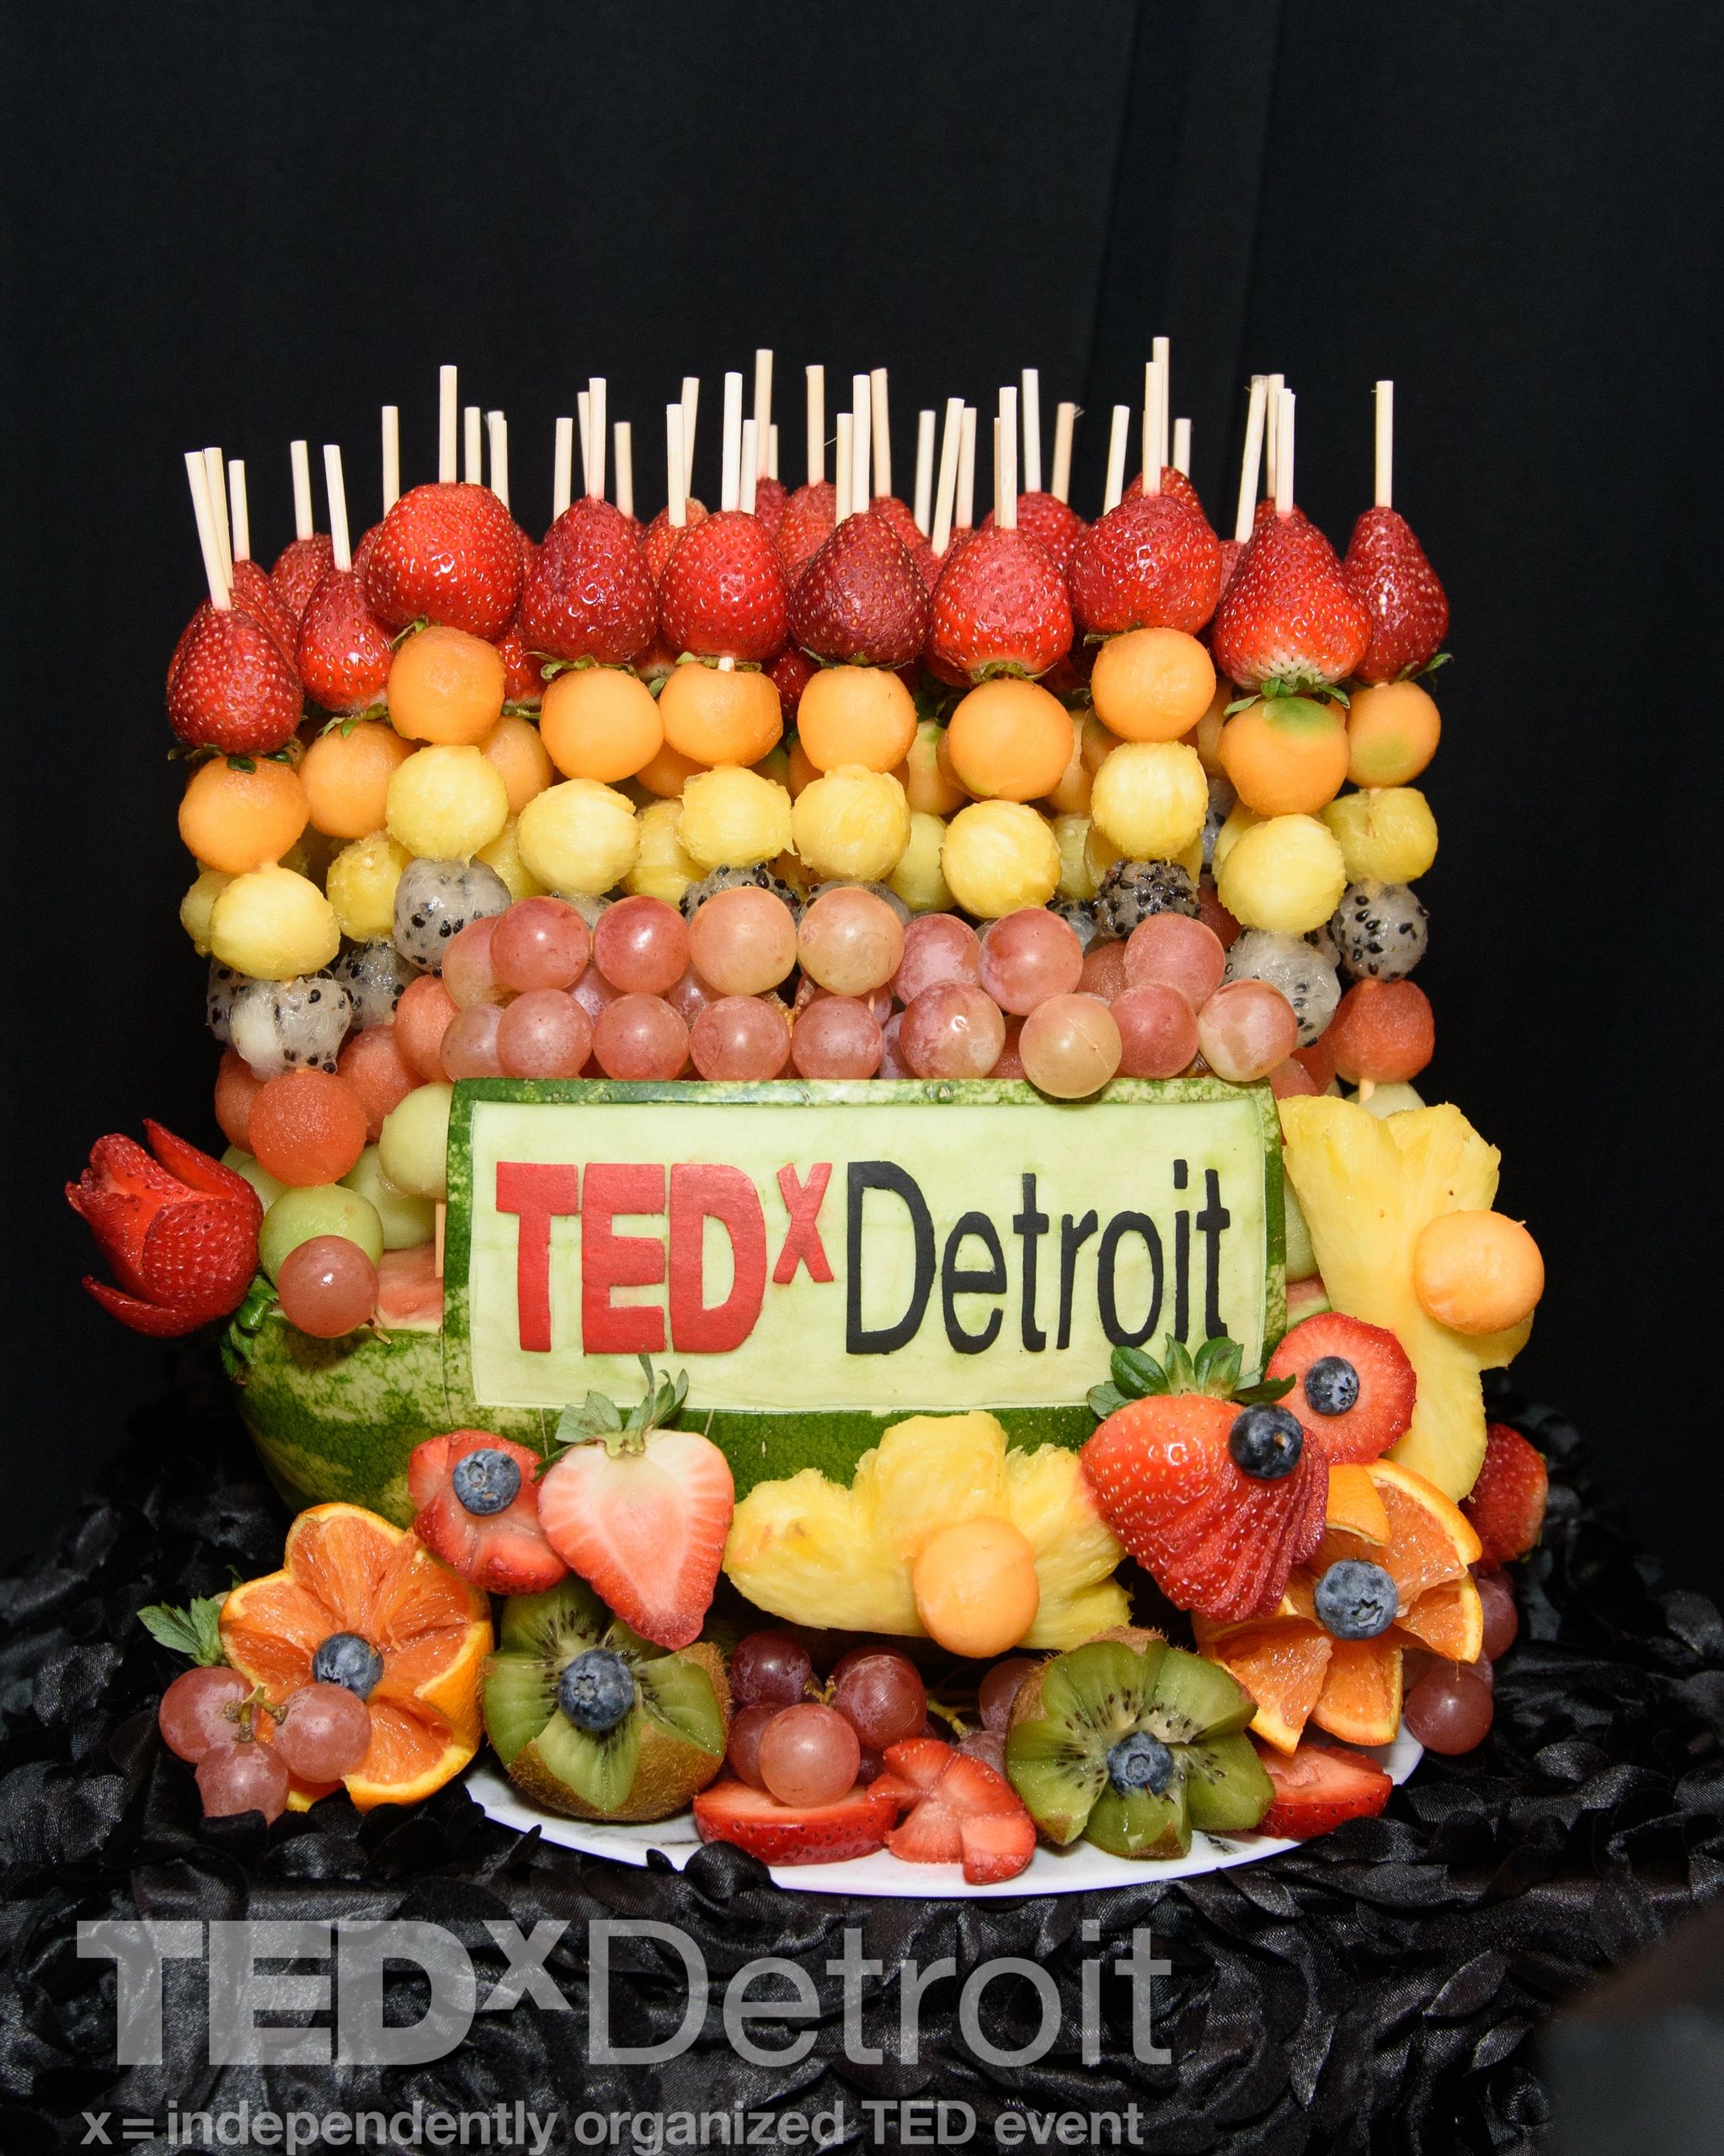 Here's a portion of our custom fruit display designed by BAPM Consulting produced by Gift Fantasy.